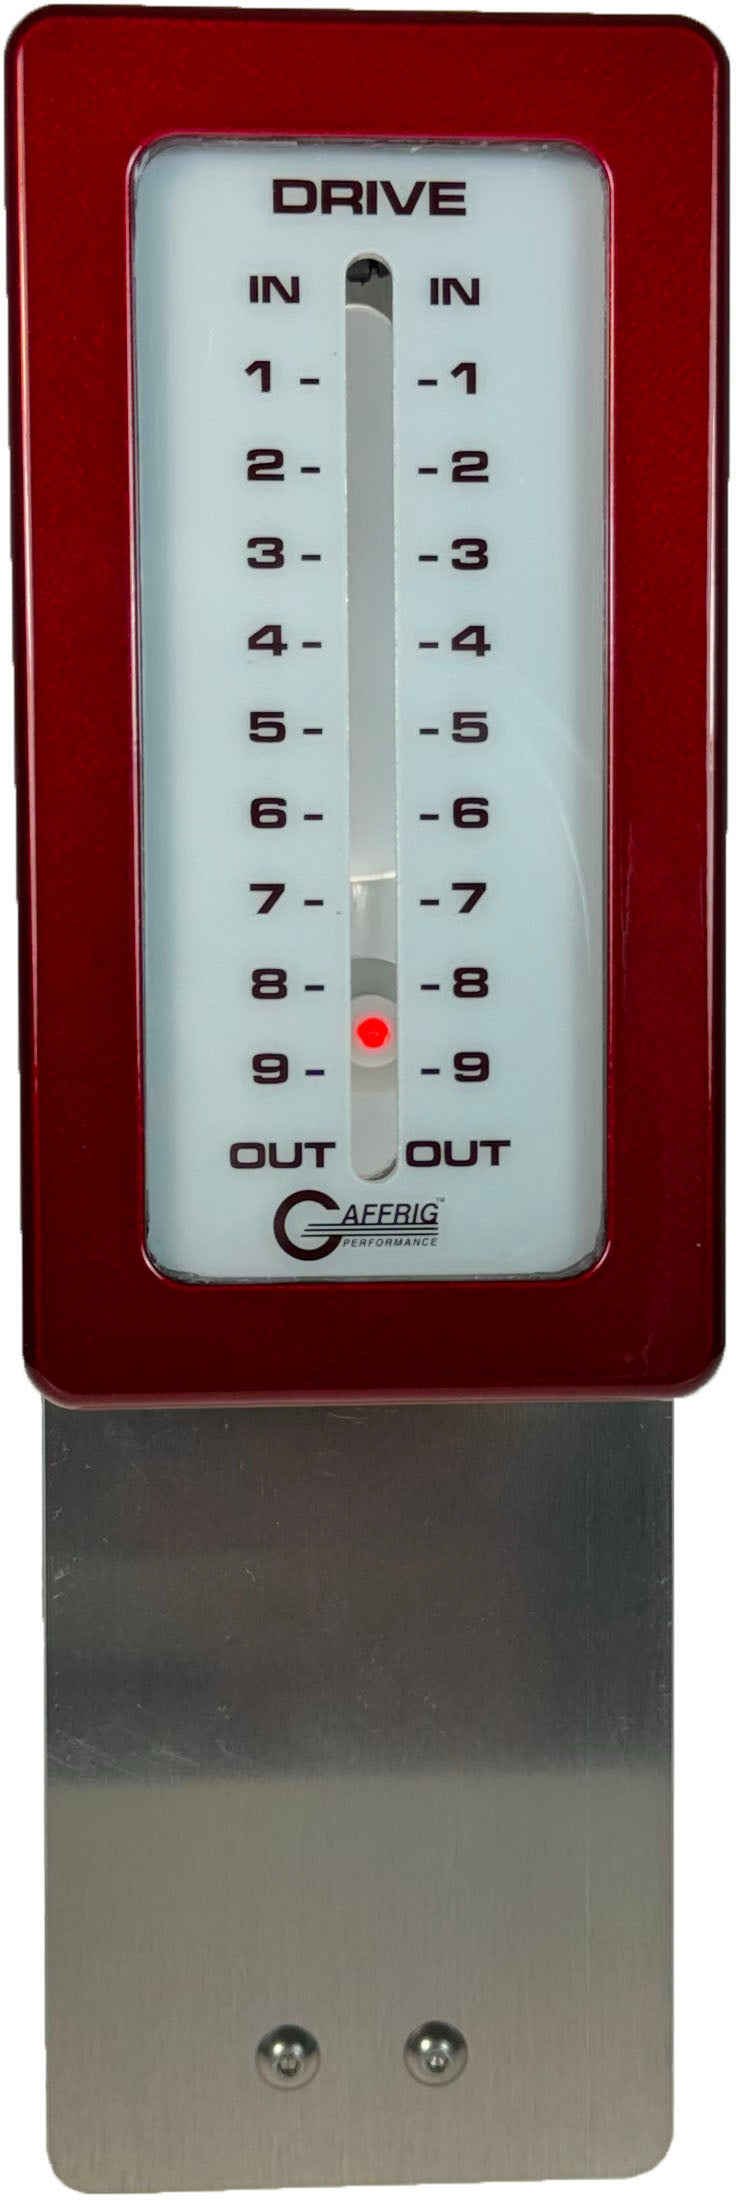 GAFFRIG PART #200 MECHANICAL INDICATOR, 1 DRIVE, MERCURY-CARD - WHITE DIAL RED